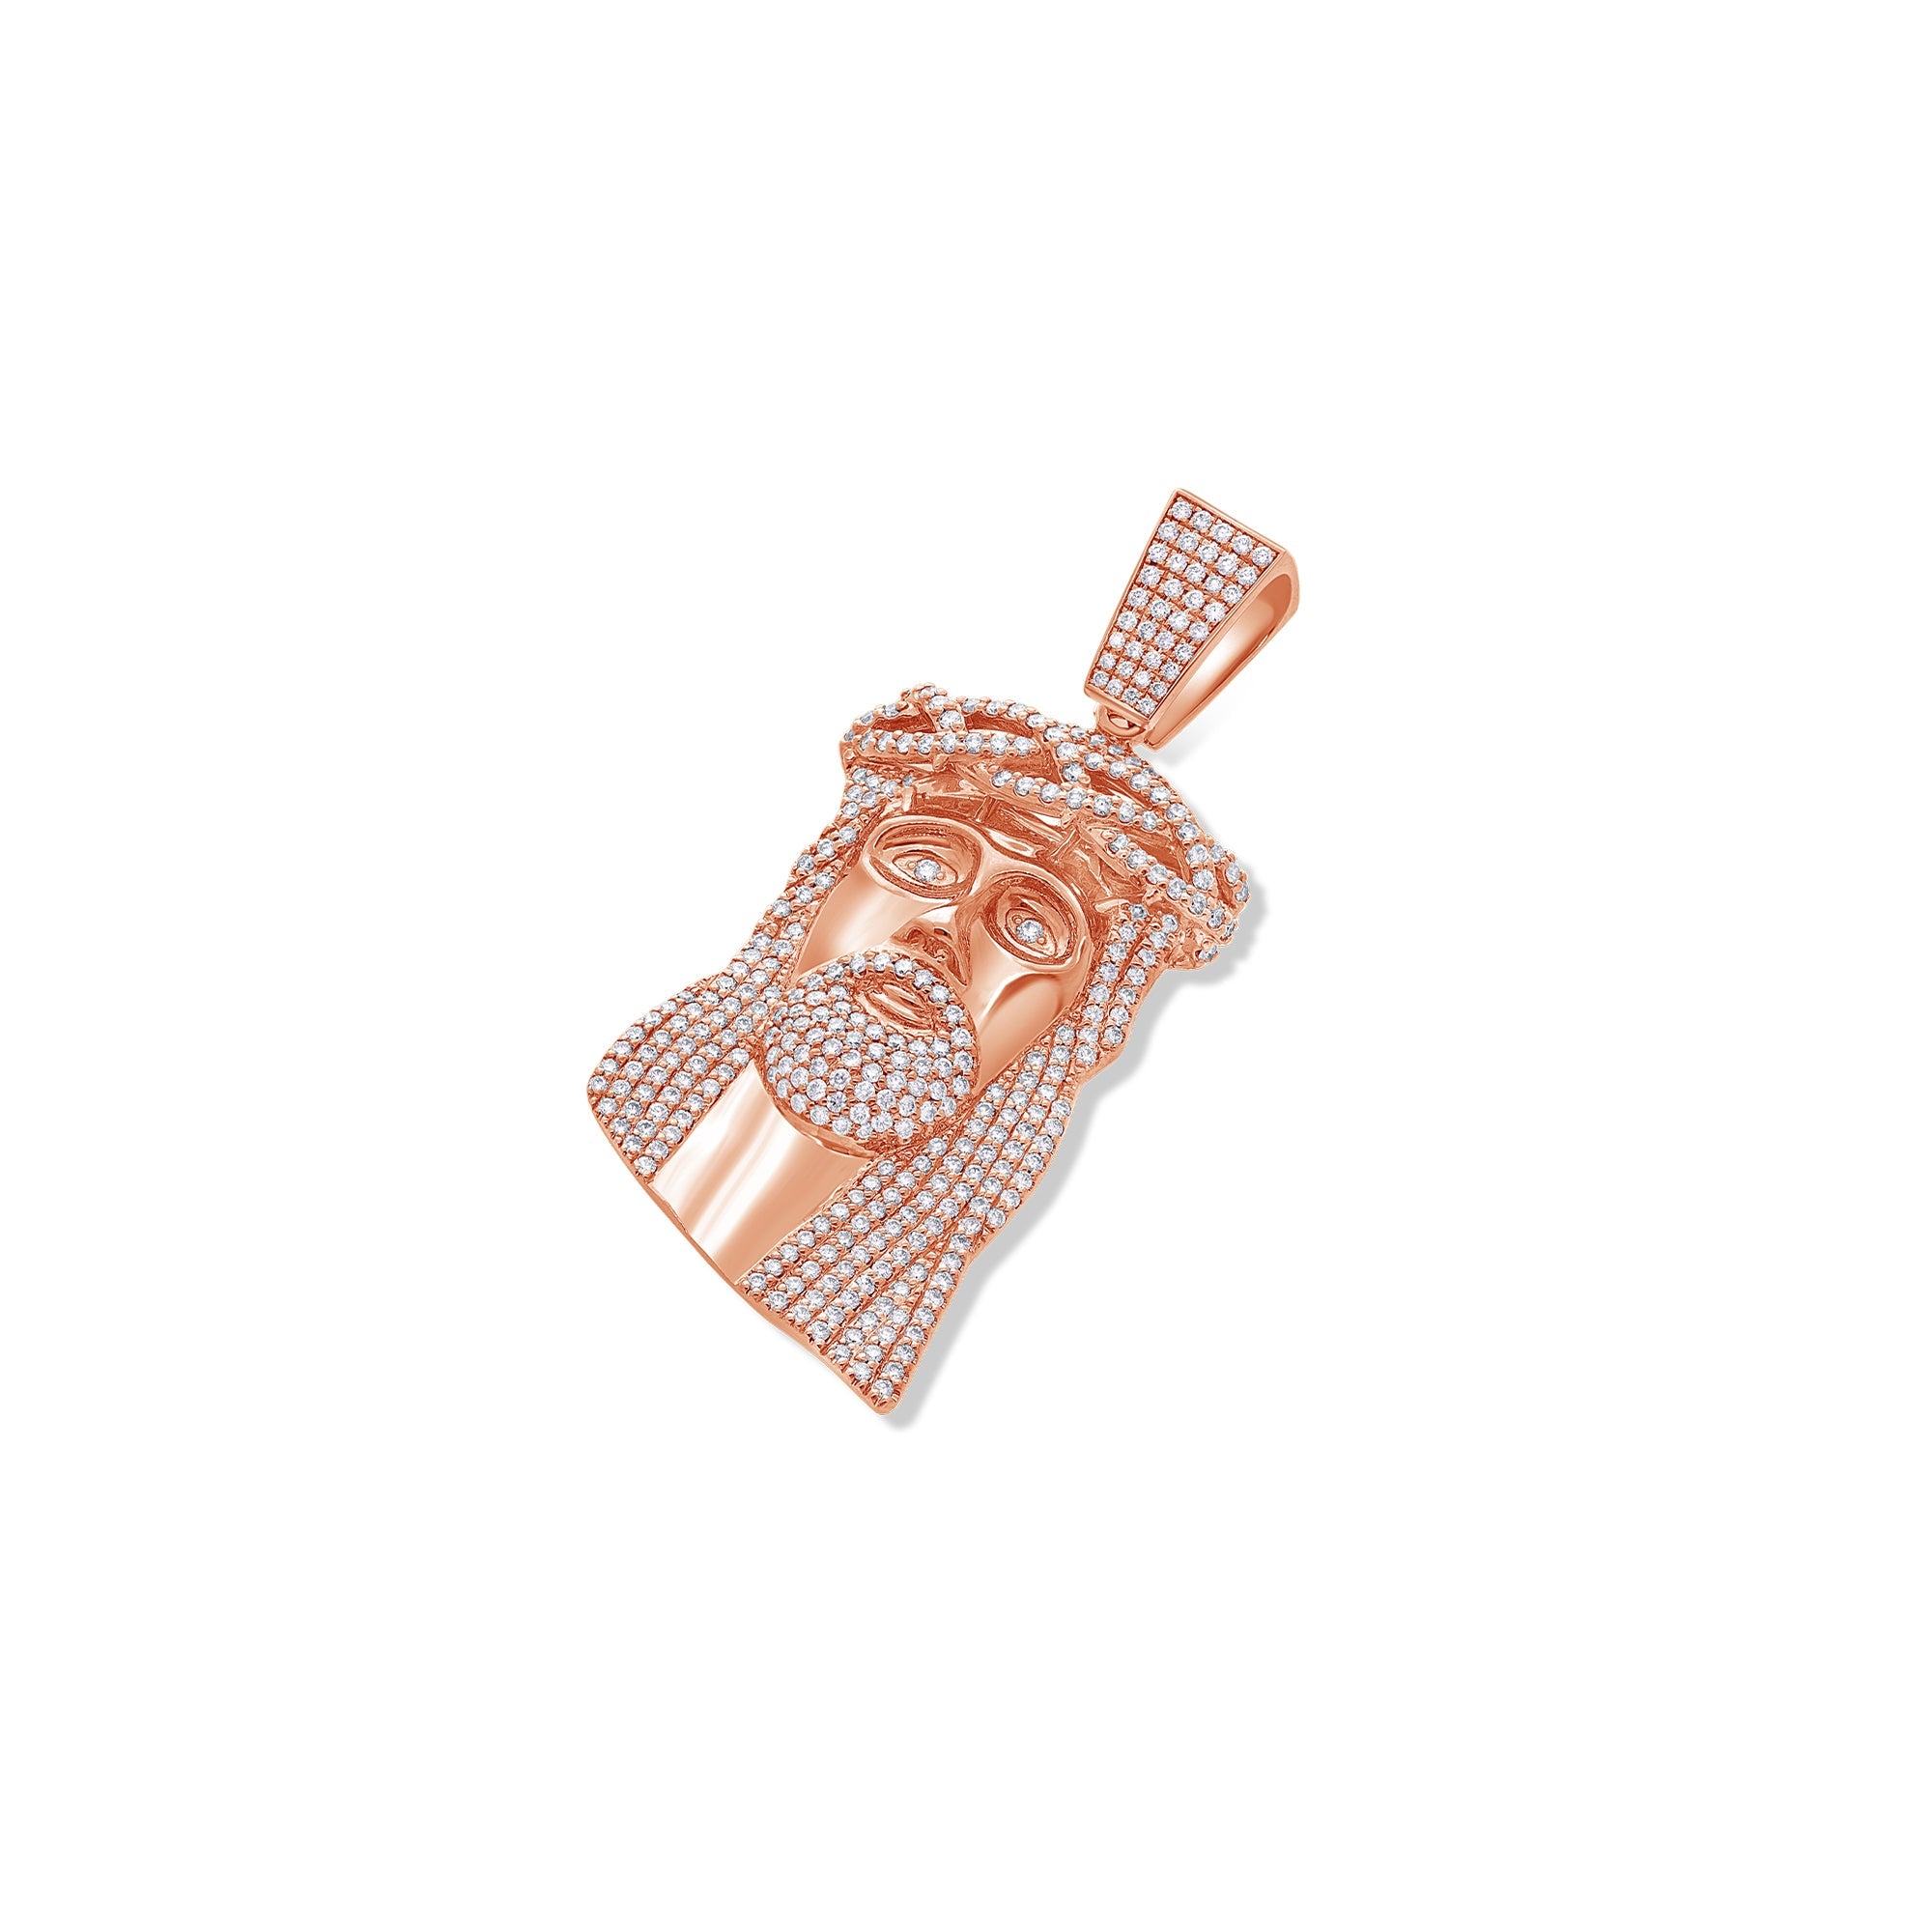 Mid-Sized Jesus Piece (Fully Iced) (14K ROSE GOLD) - IF & Co. Custom Jewelers